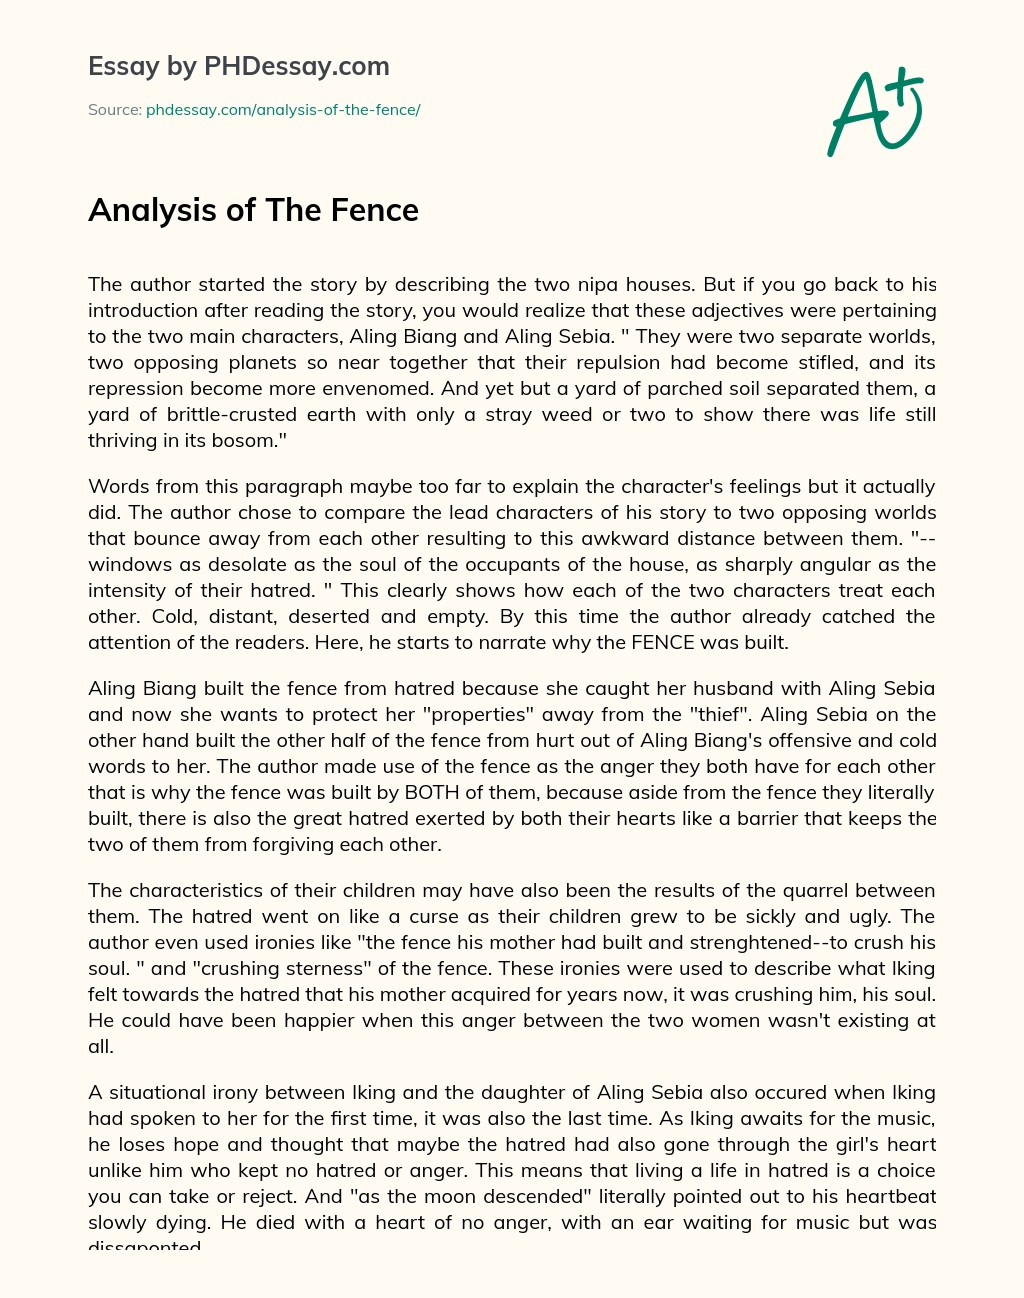 Analysis of The Fence essay